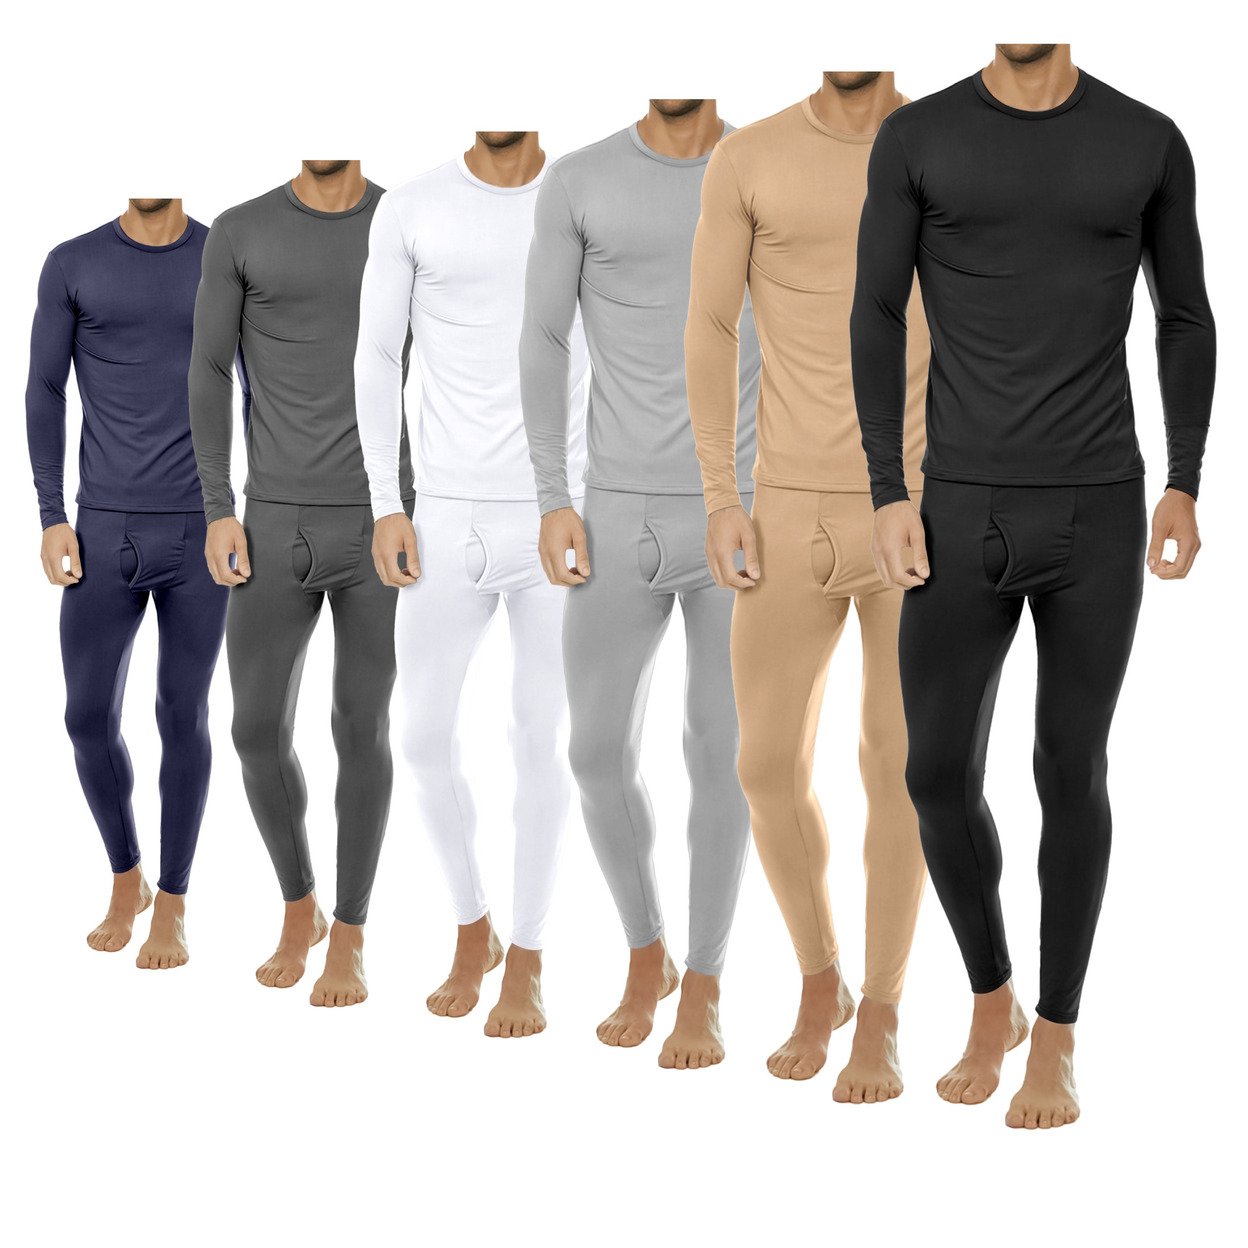 2-Sets: Men's Winter Warm Fleece Lined Thermal Underwear Set For Cold Weather - Grey&white, Large